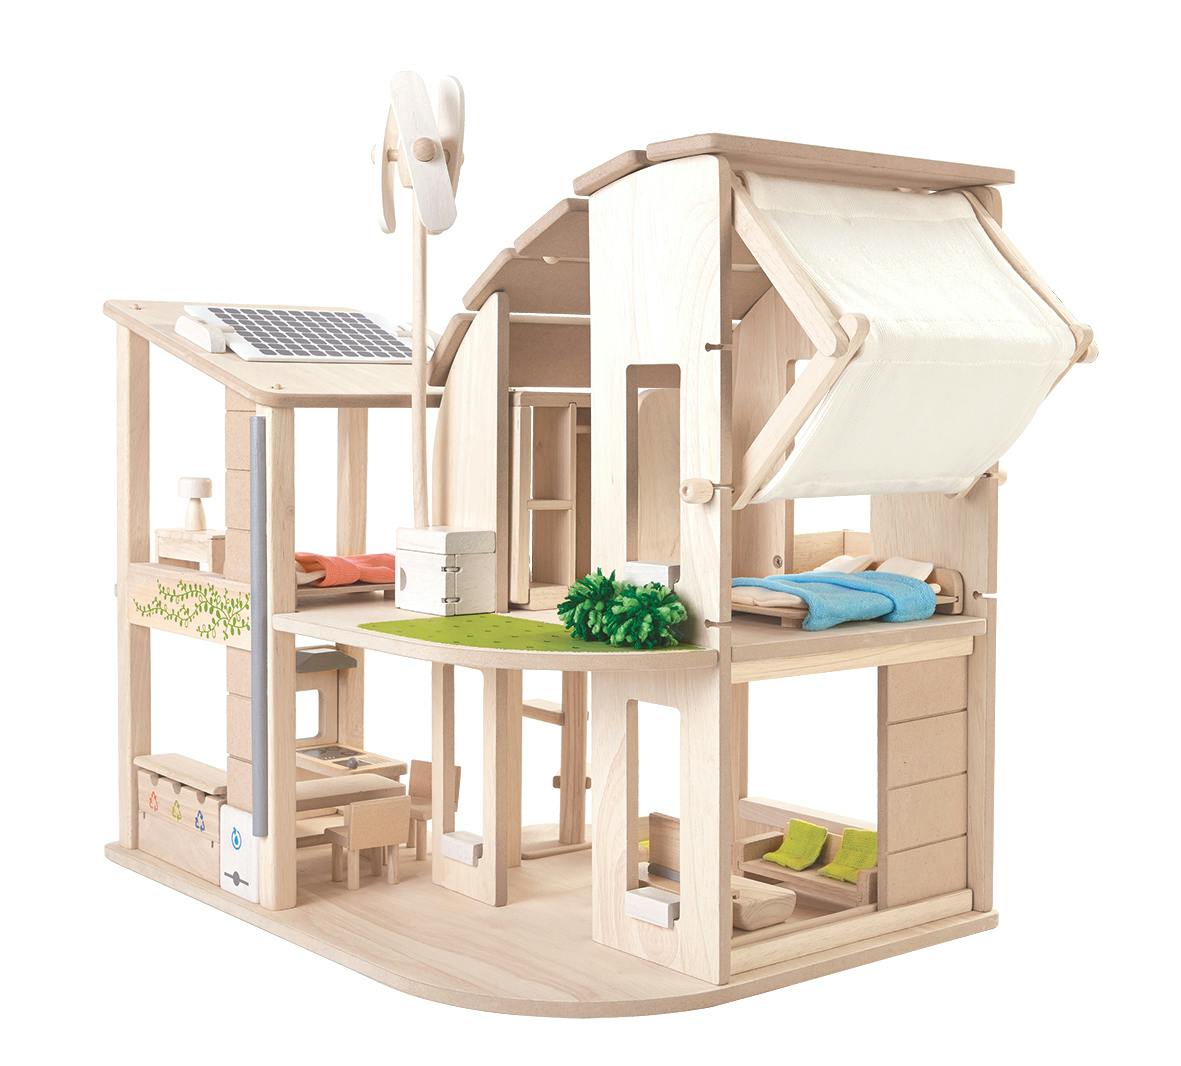 PlanToys Green Dollhouse With Furniture